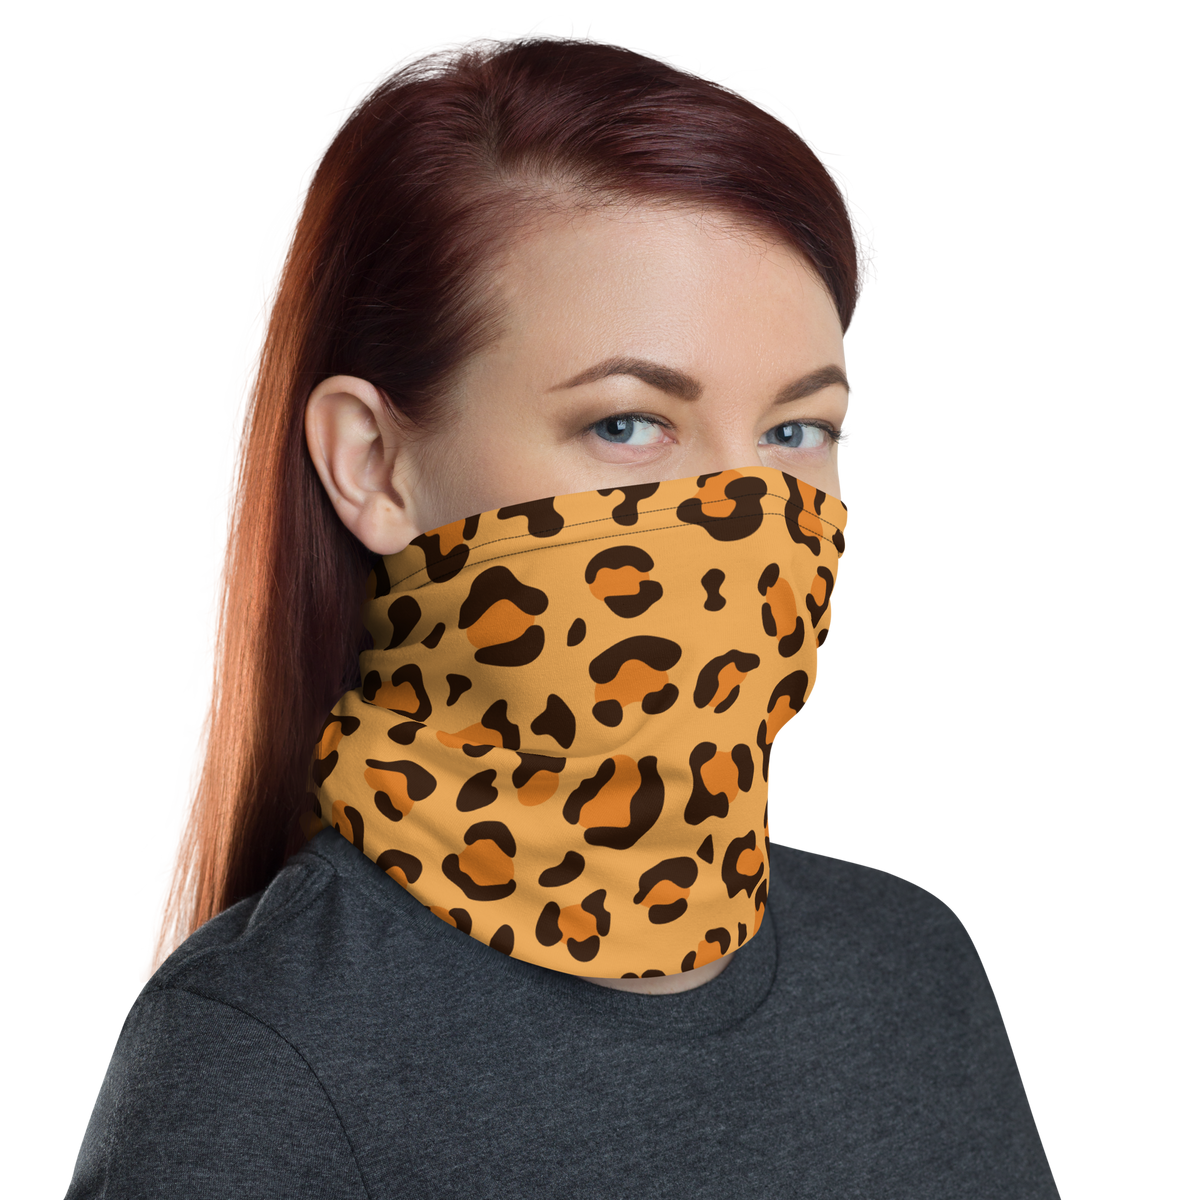 Customise Neck Scarf. Printed Neck Warmer Tube Scarf Snood